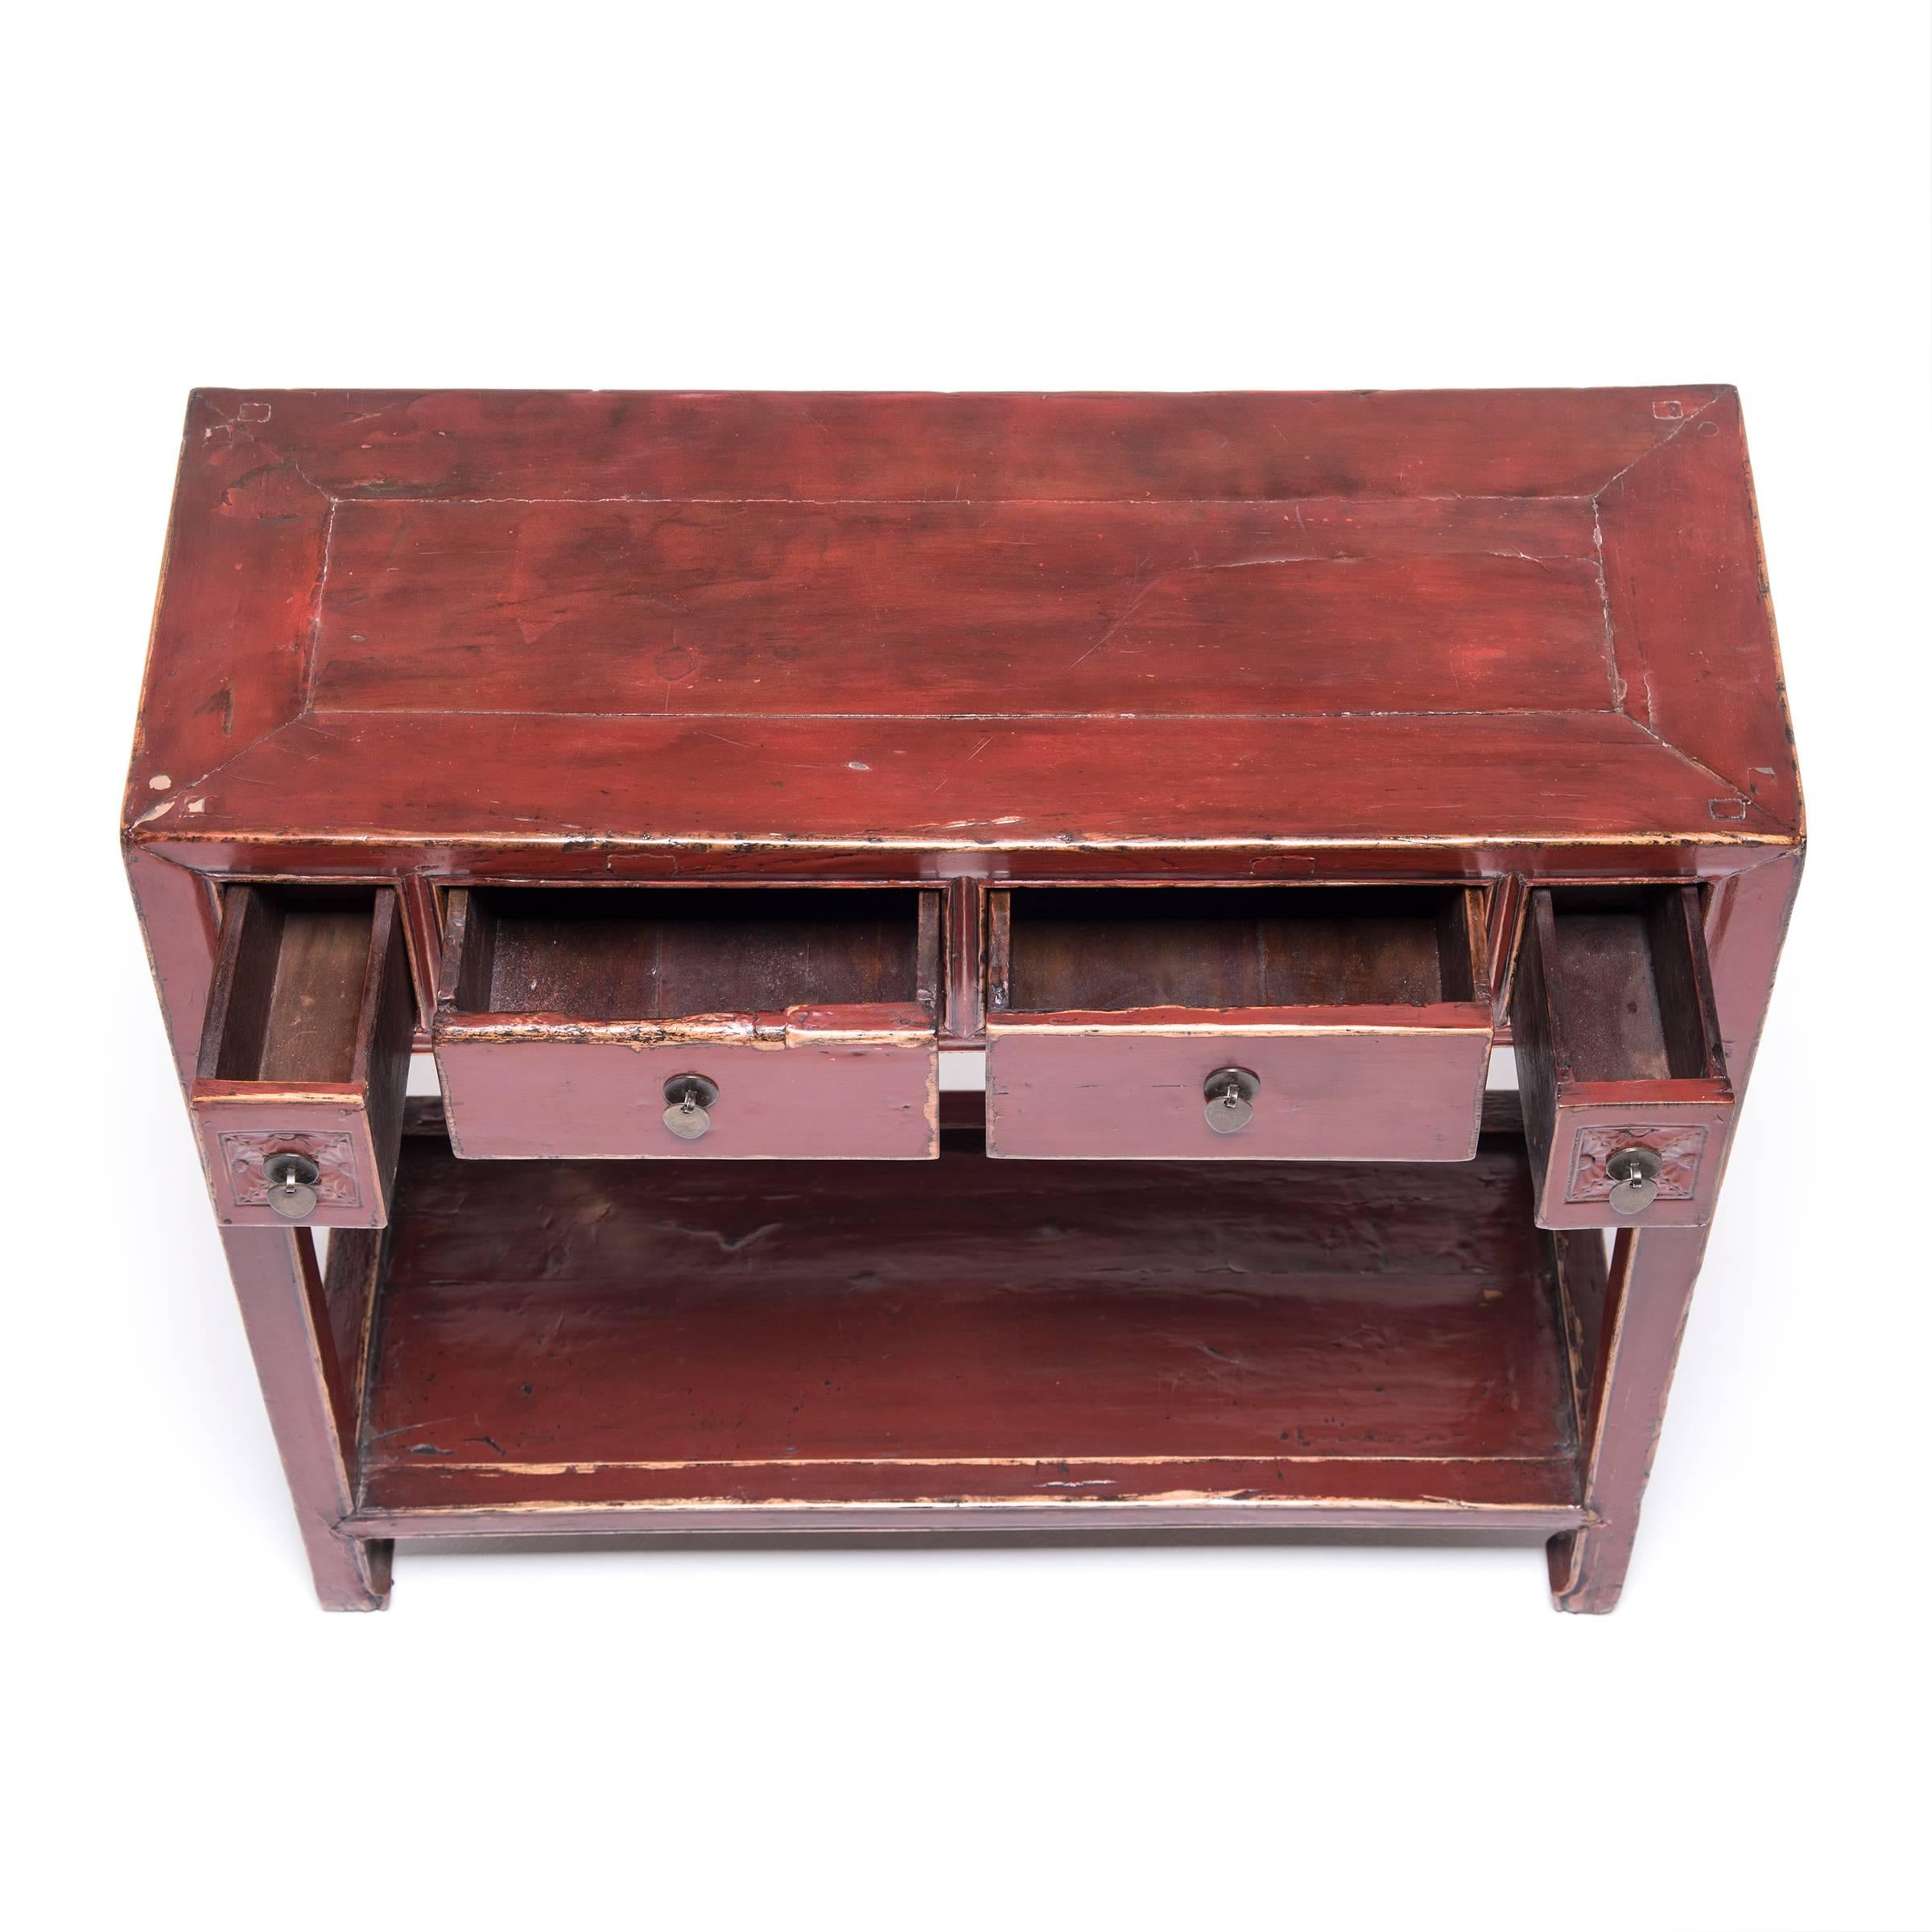 20th Century Four-Drawer Chinese Red Lacquer Table with Shelf